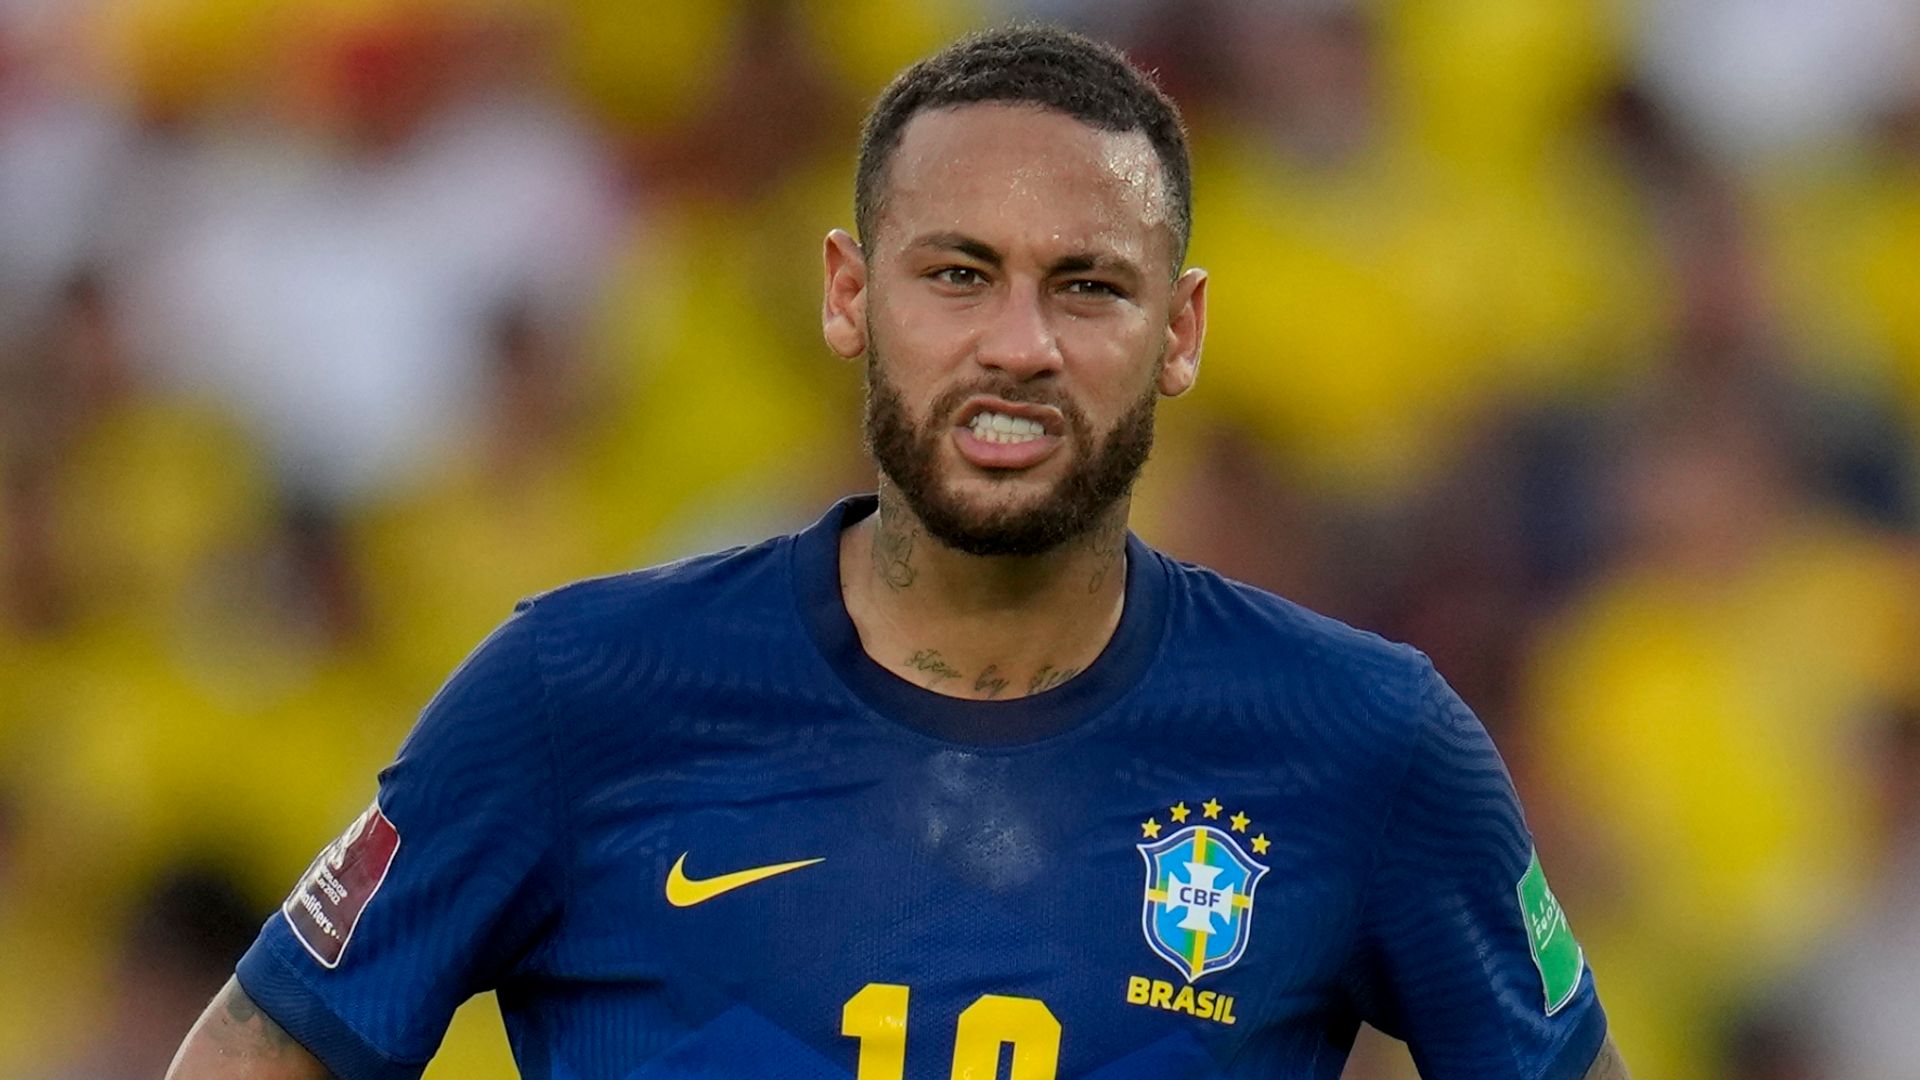 Neymar believes next World Cup will be his last